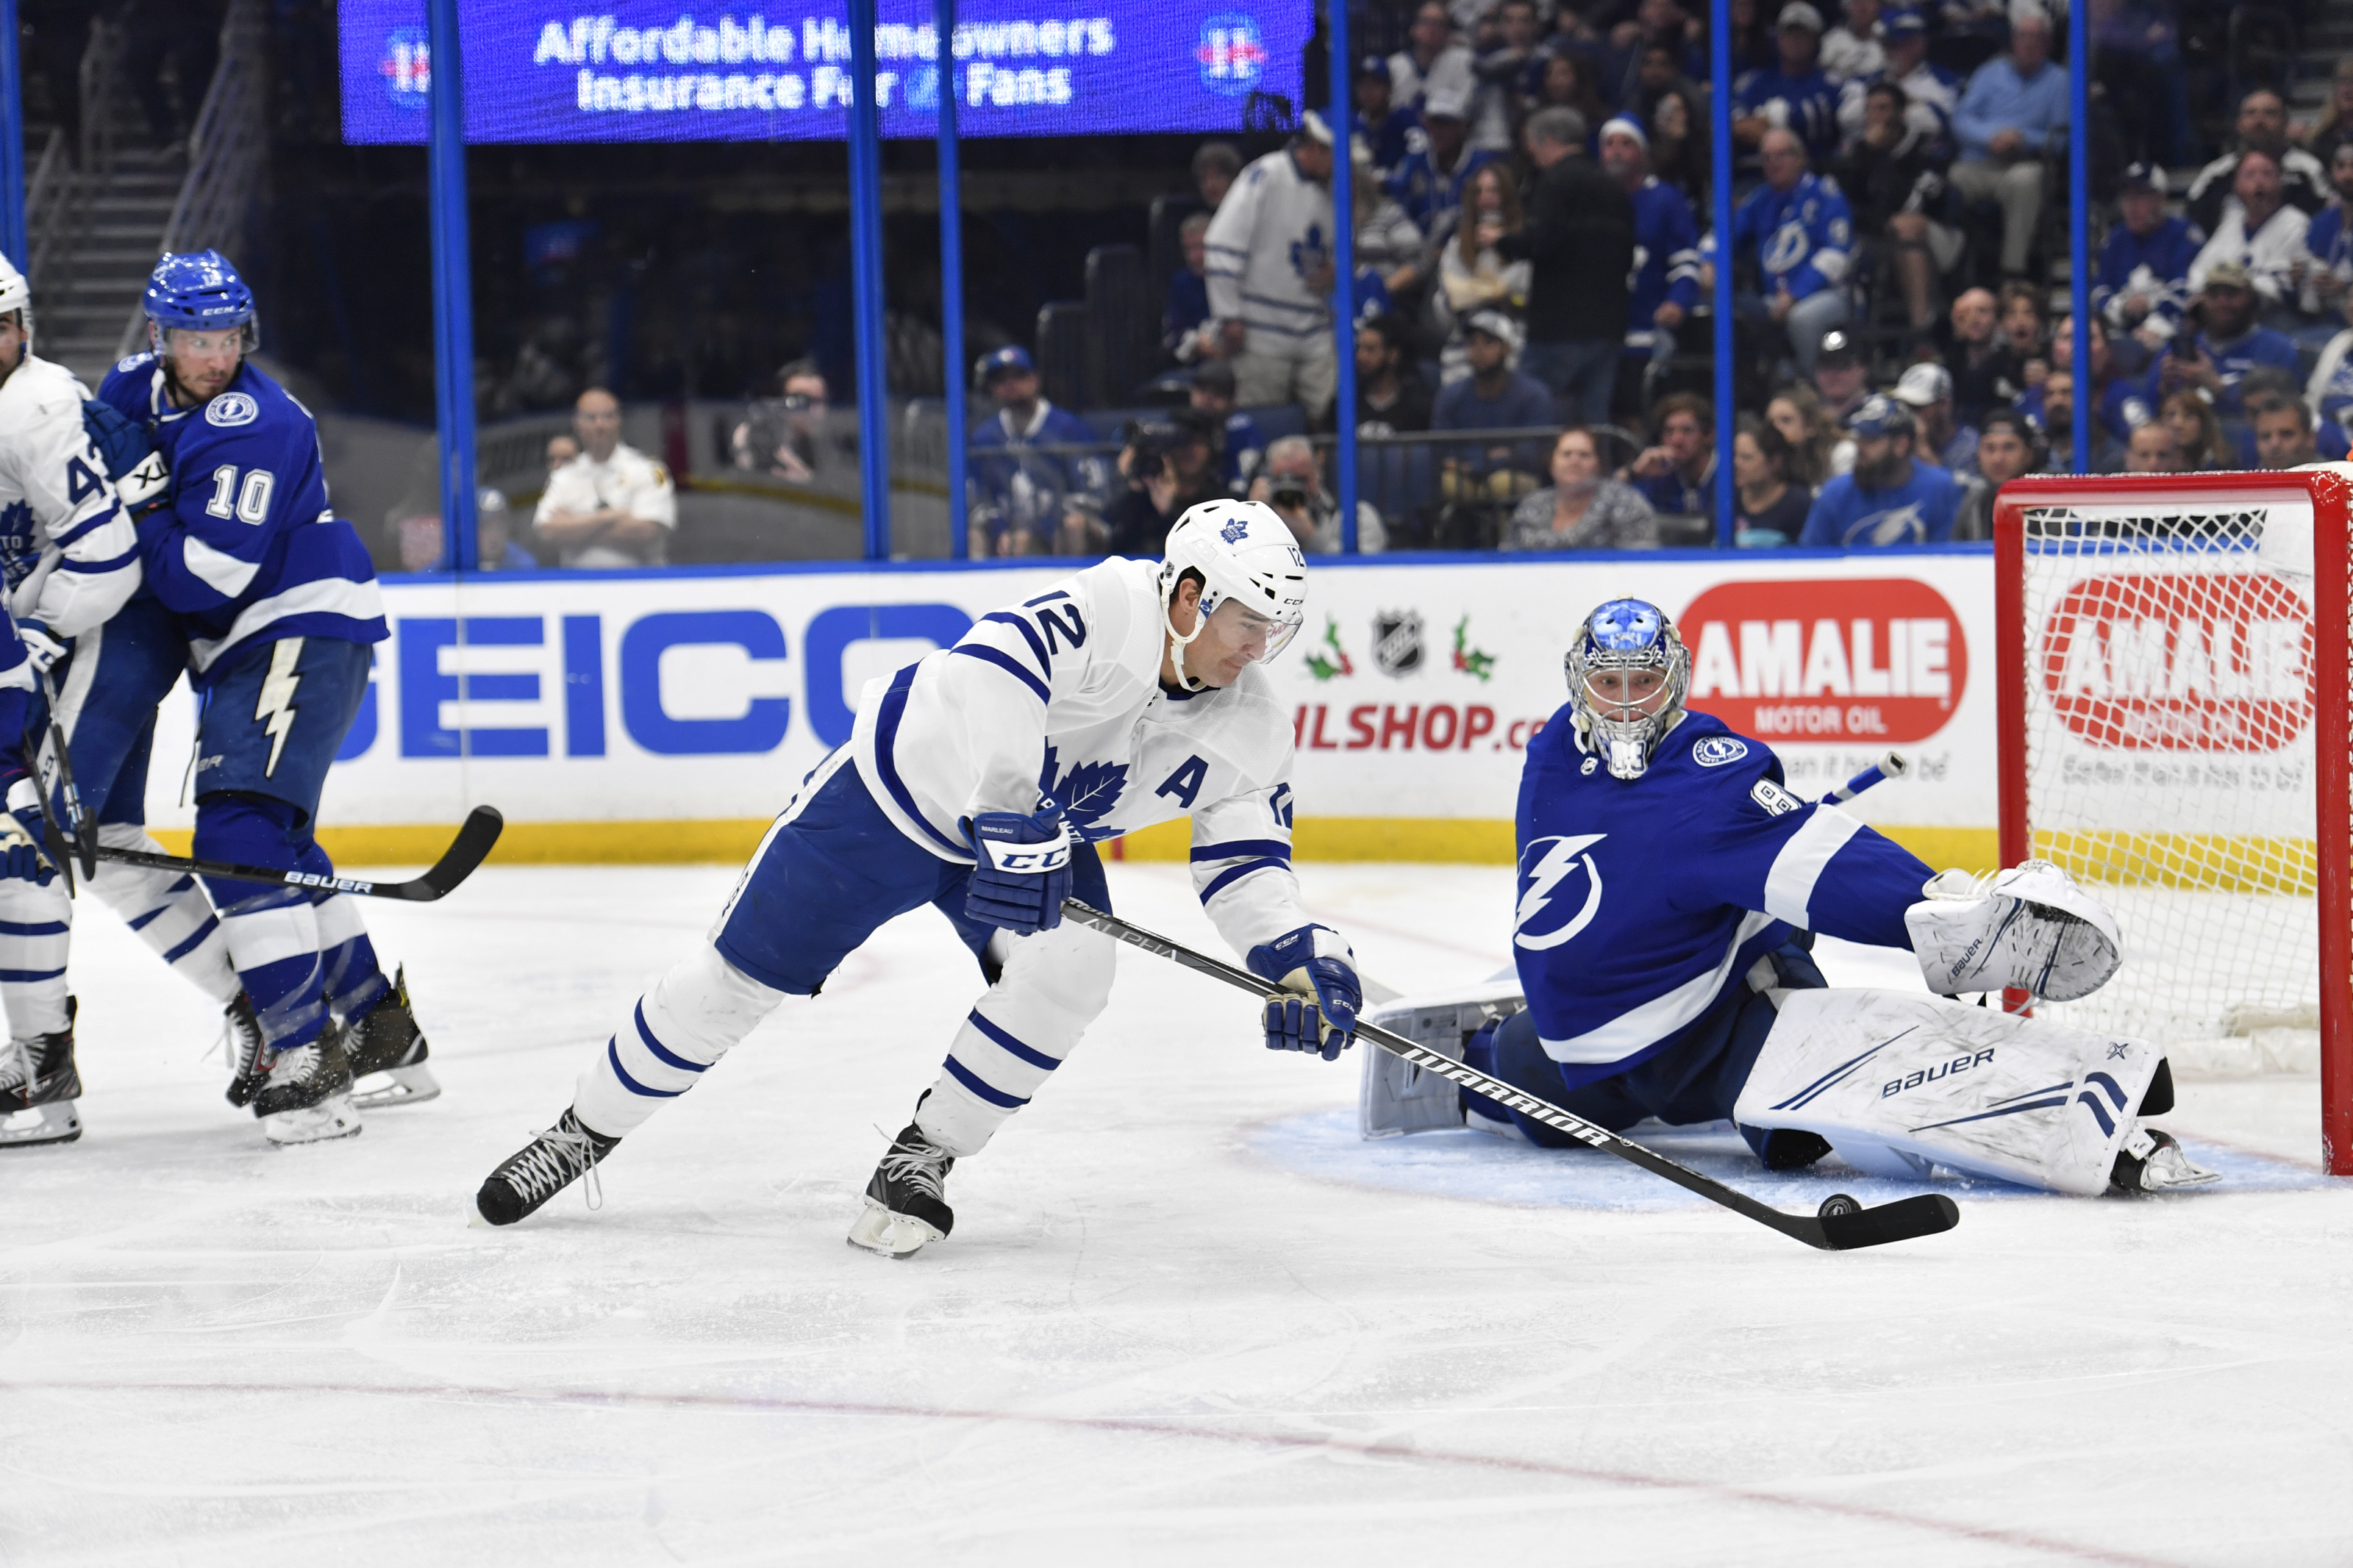 Auston Matthews pays homage to Patrick Marleau at the 2019 NHL All